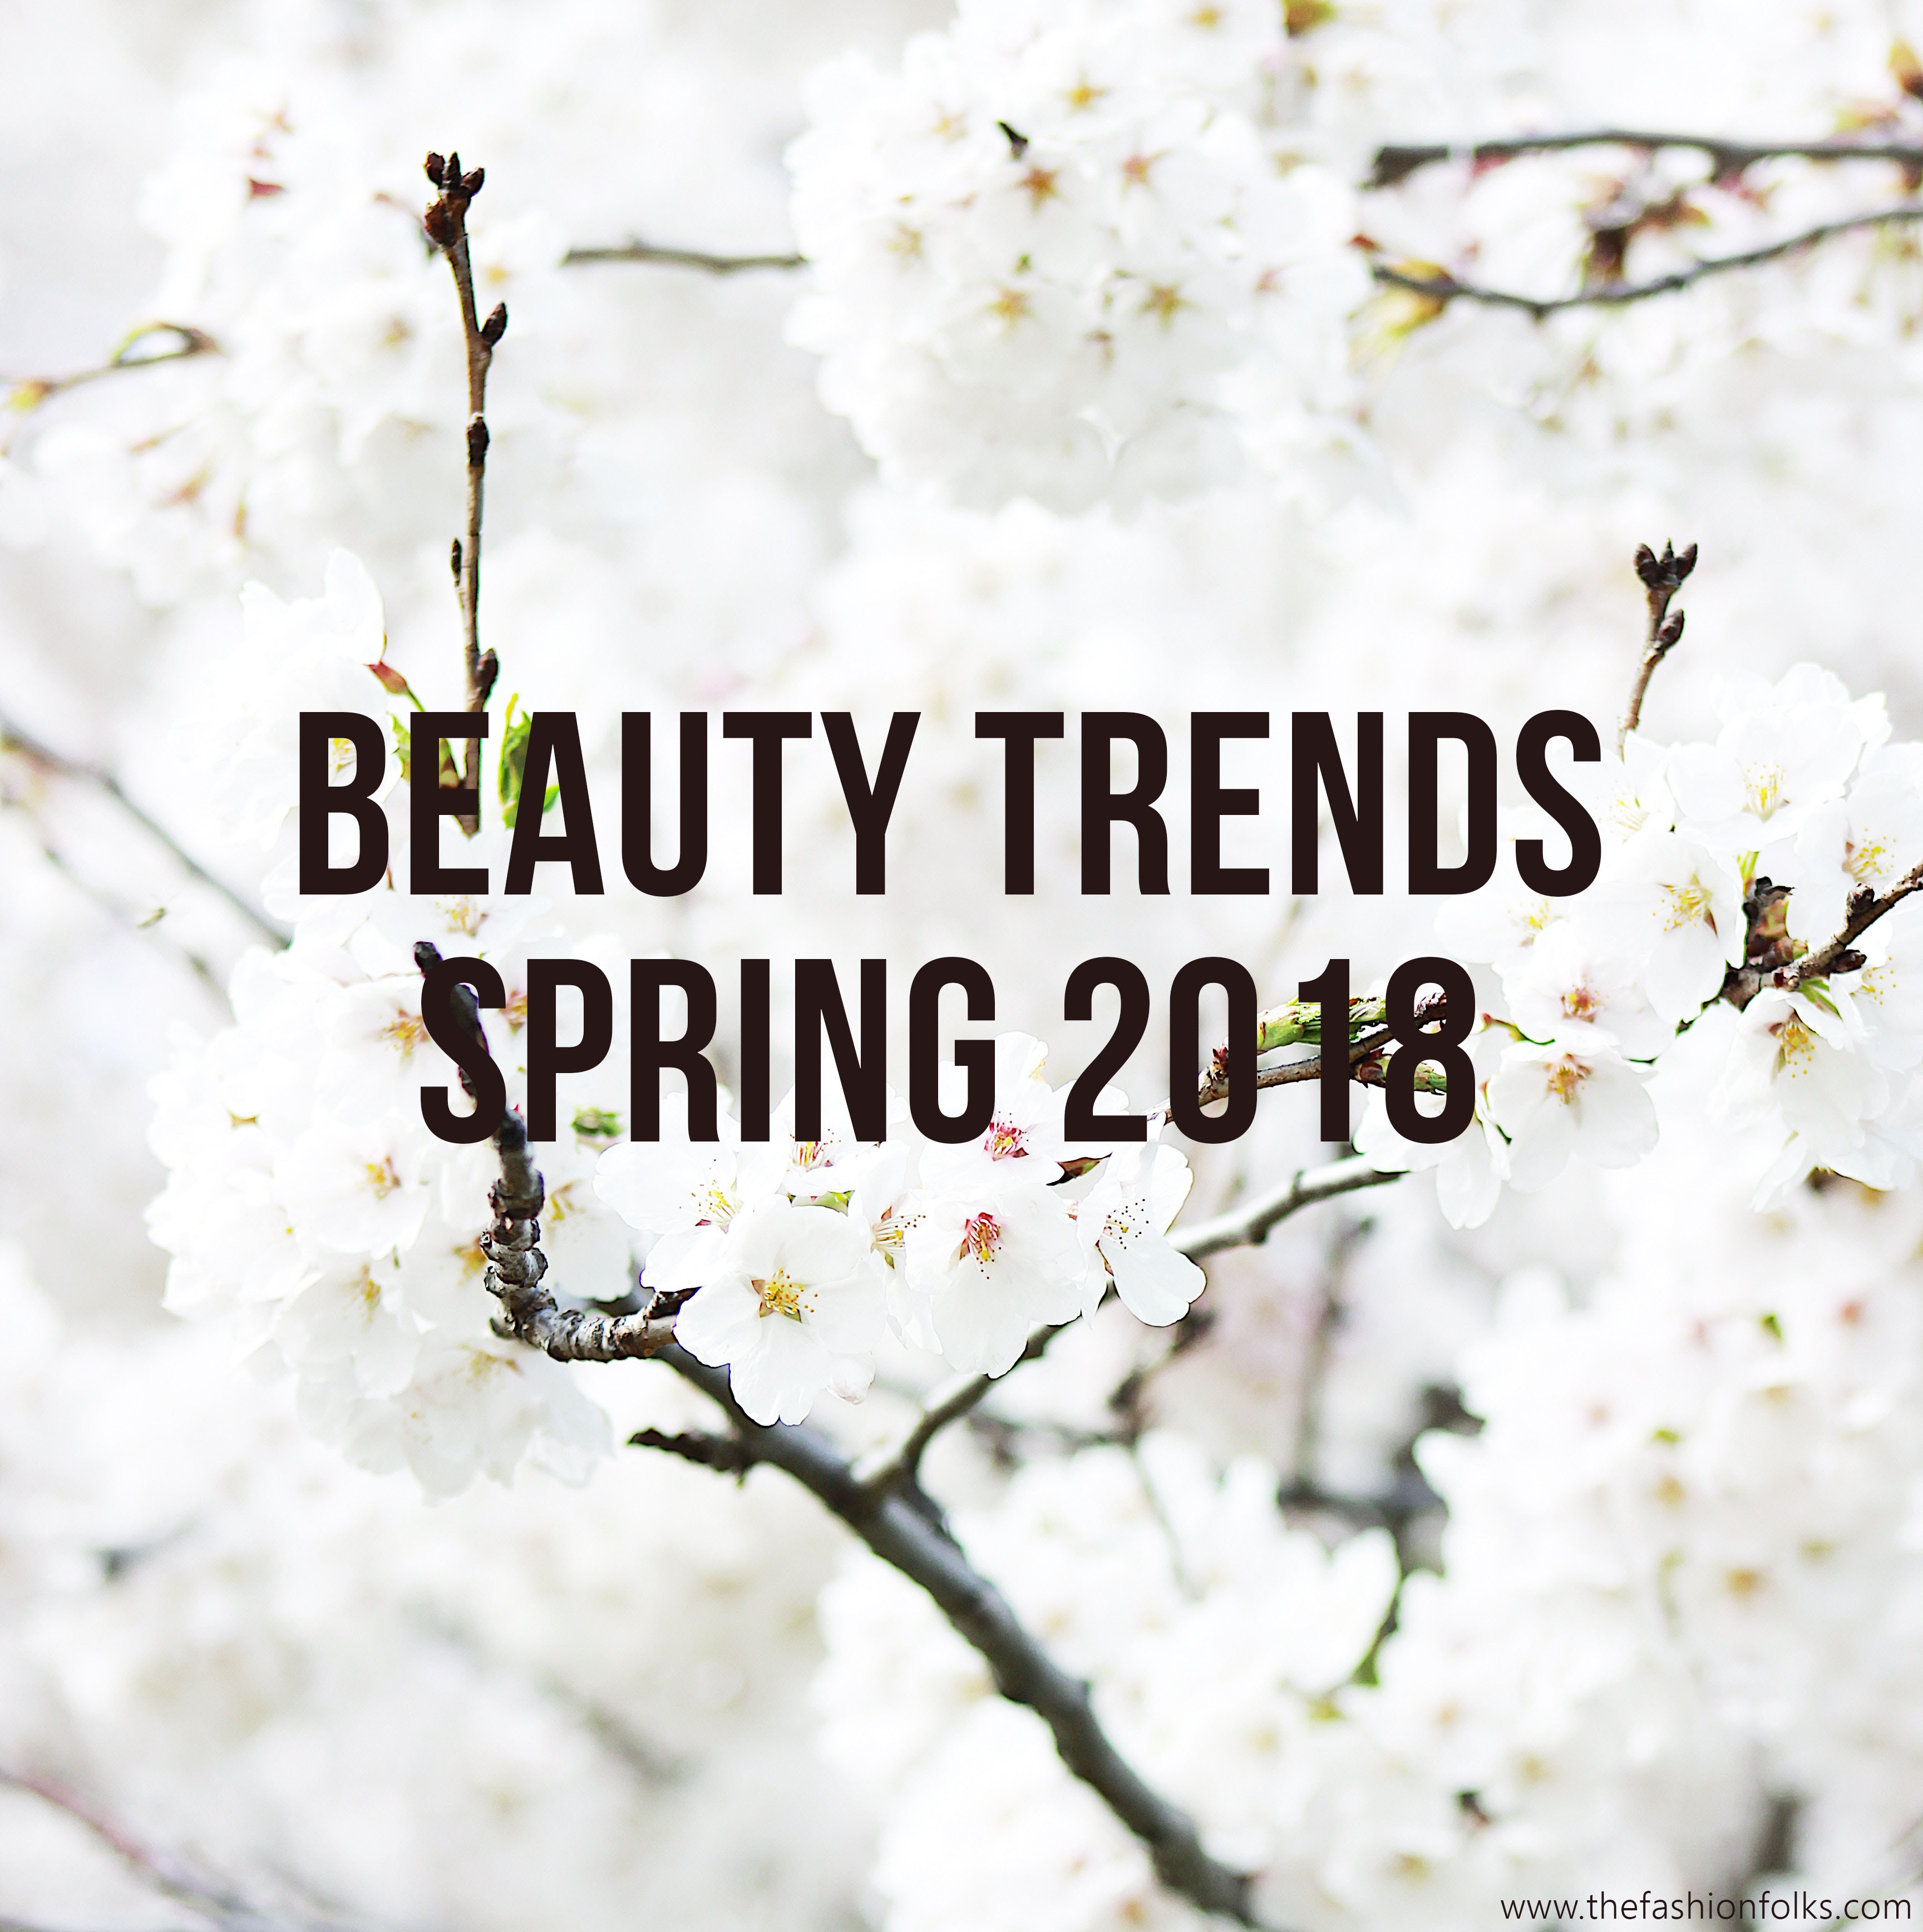 Beauty Trends Spring 2018